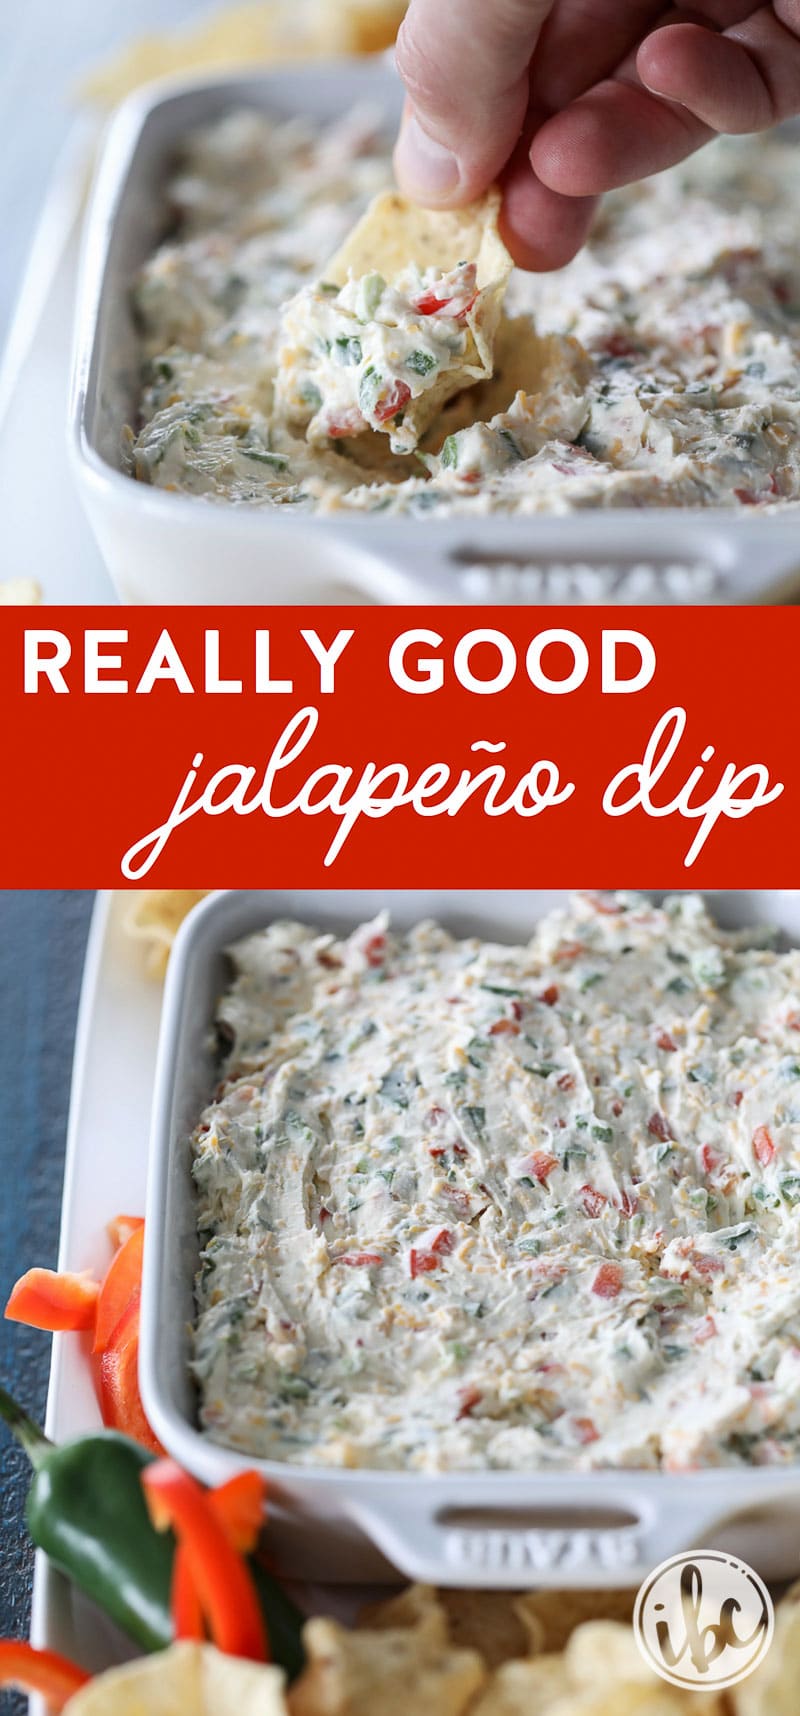 This really Really Good Jalapeño Dip #recipe make a delicious #appetizer #dip for any #celebration! #jalapeño